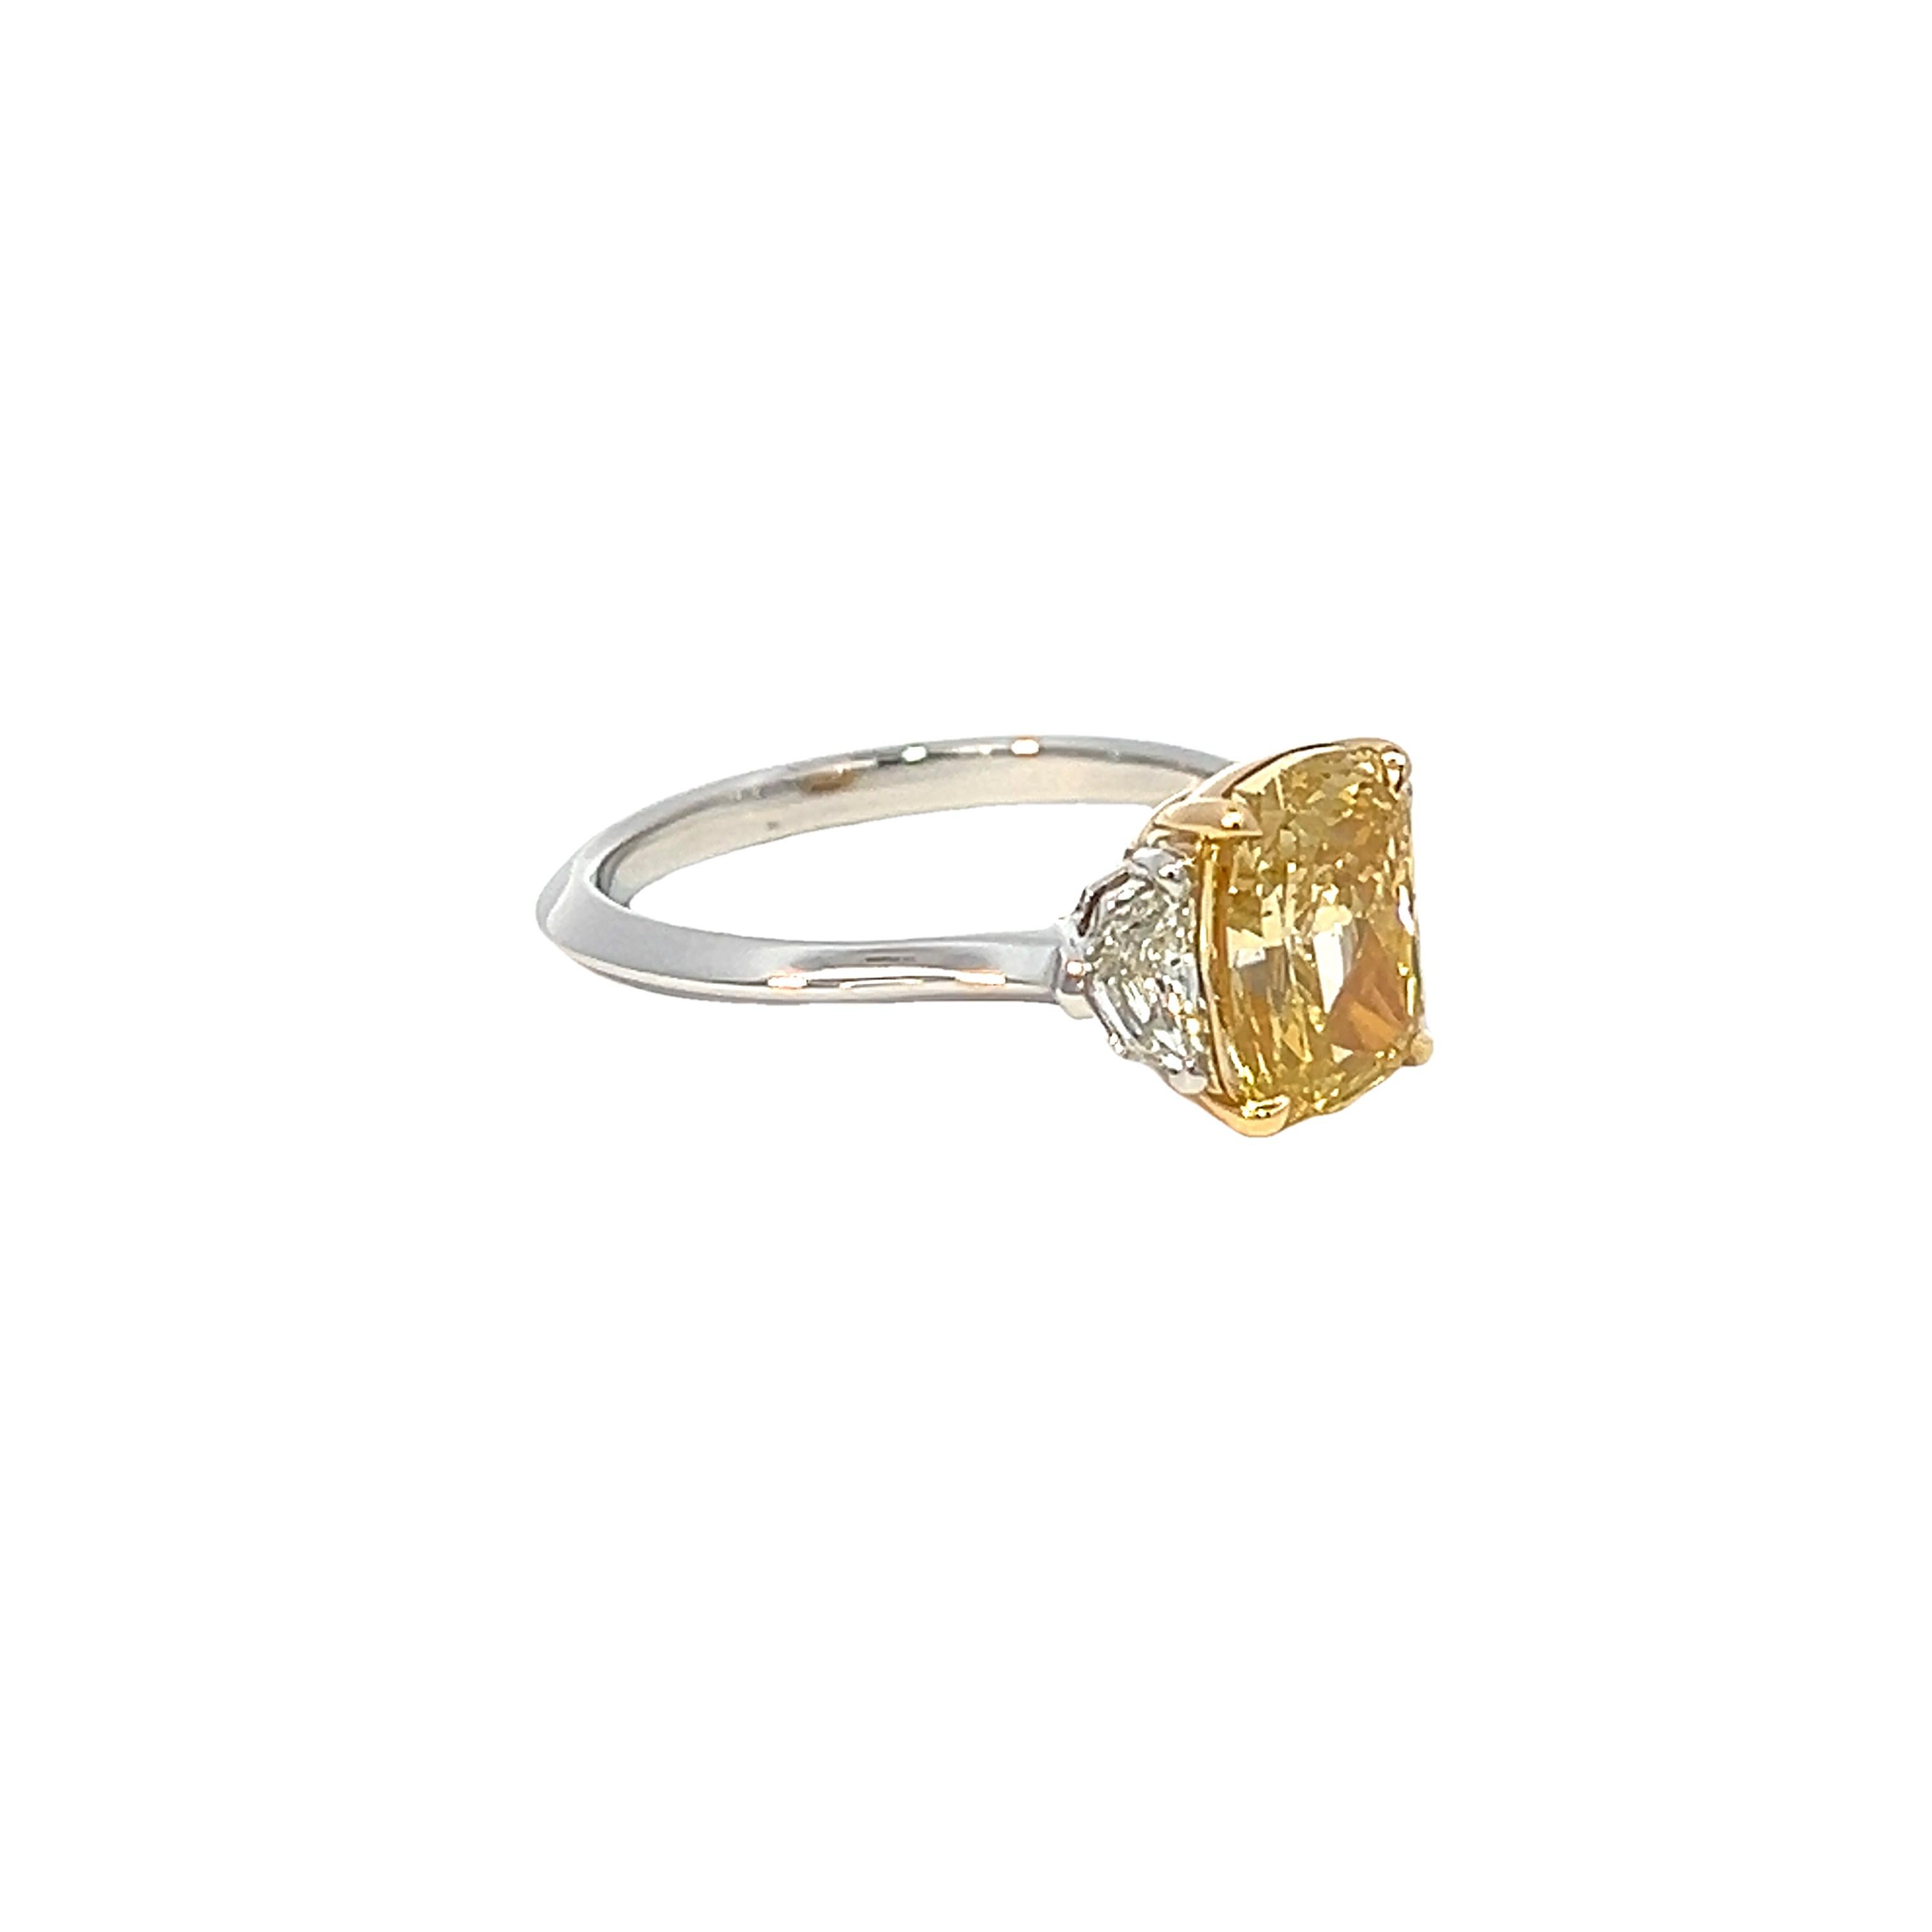 Cushion Cut 2.85CT Total Weight Fancy Intense Yellow Diamond Ring, GIA Cert For Sale